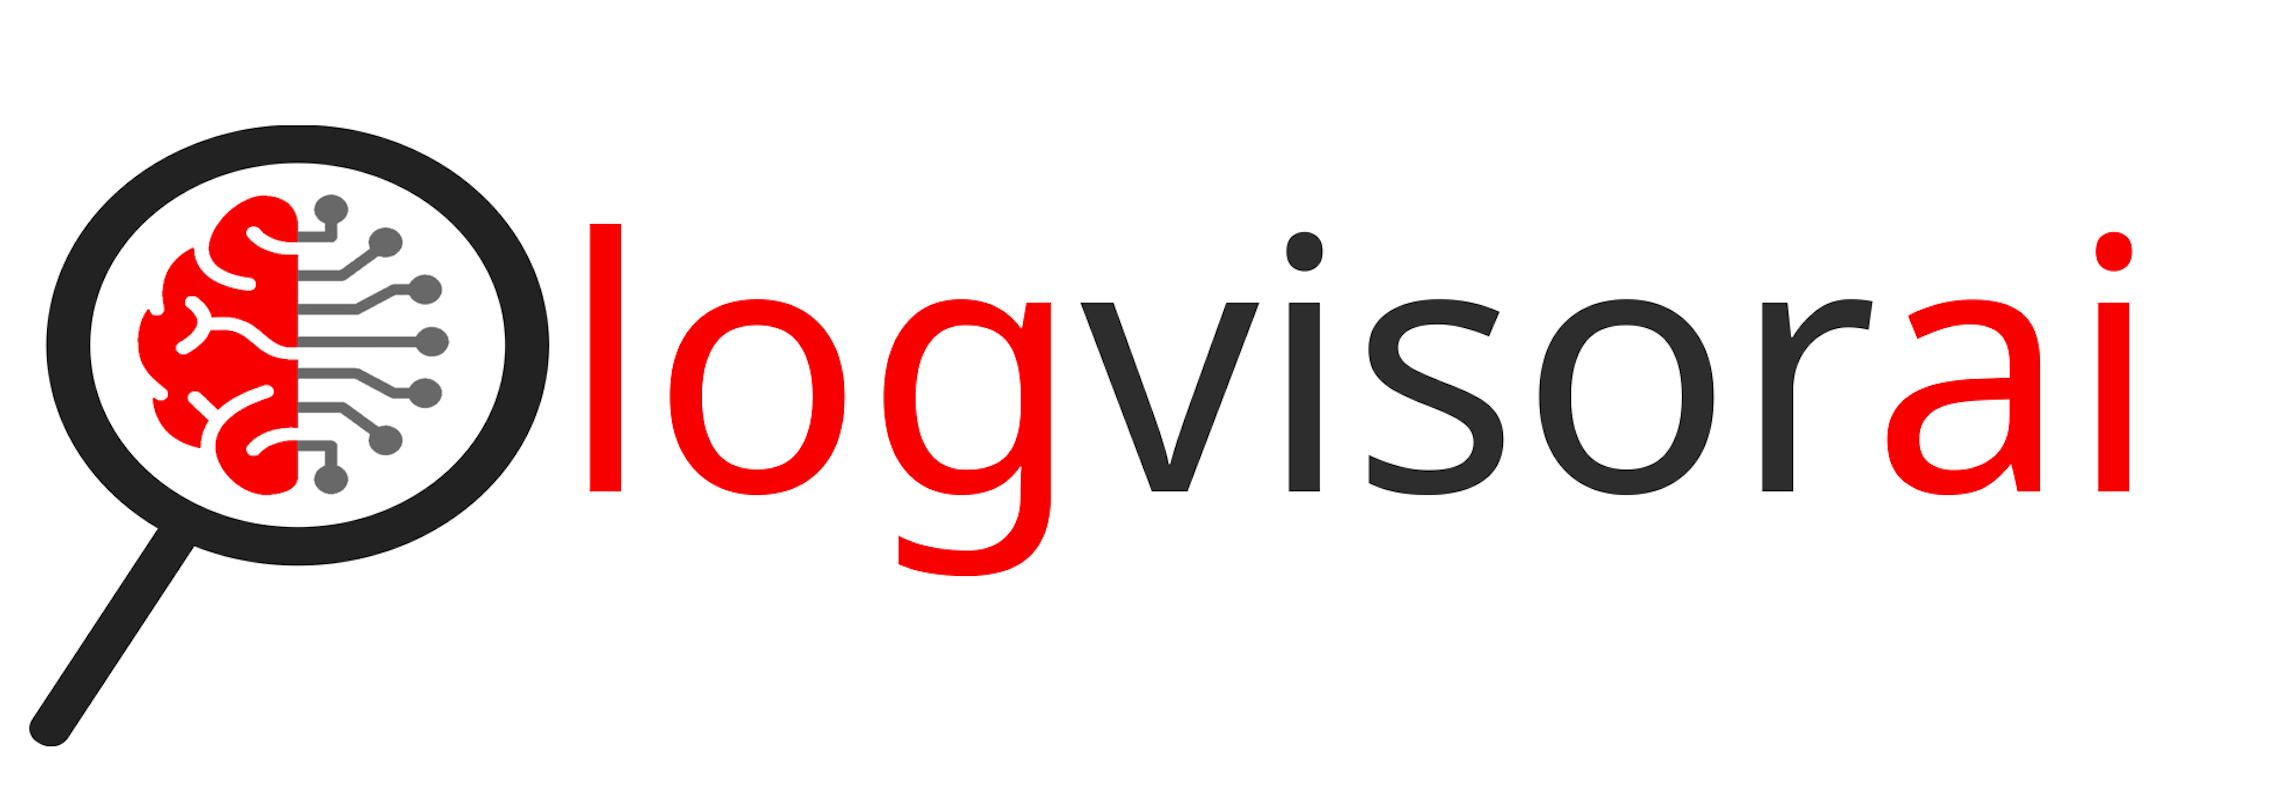 Request Your Demo of Our New LogVisor AI Tool